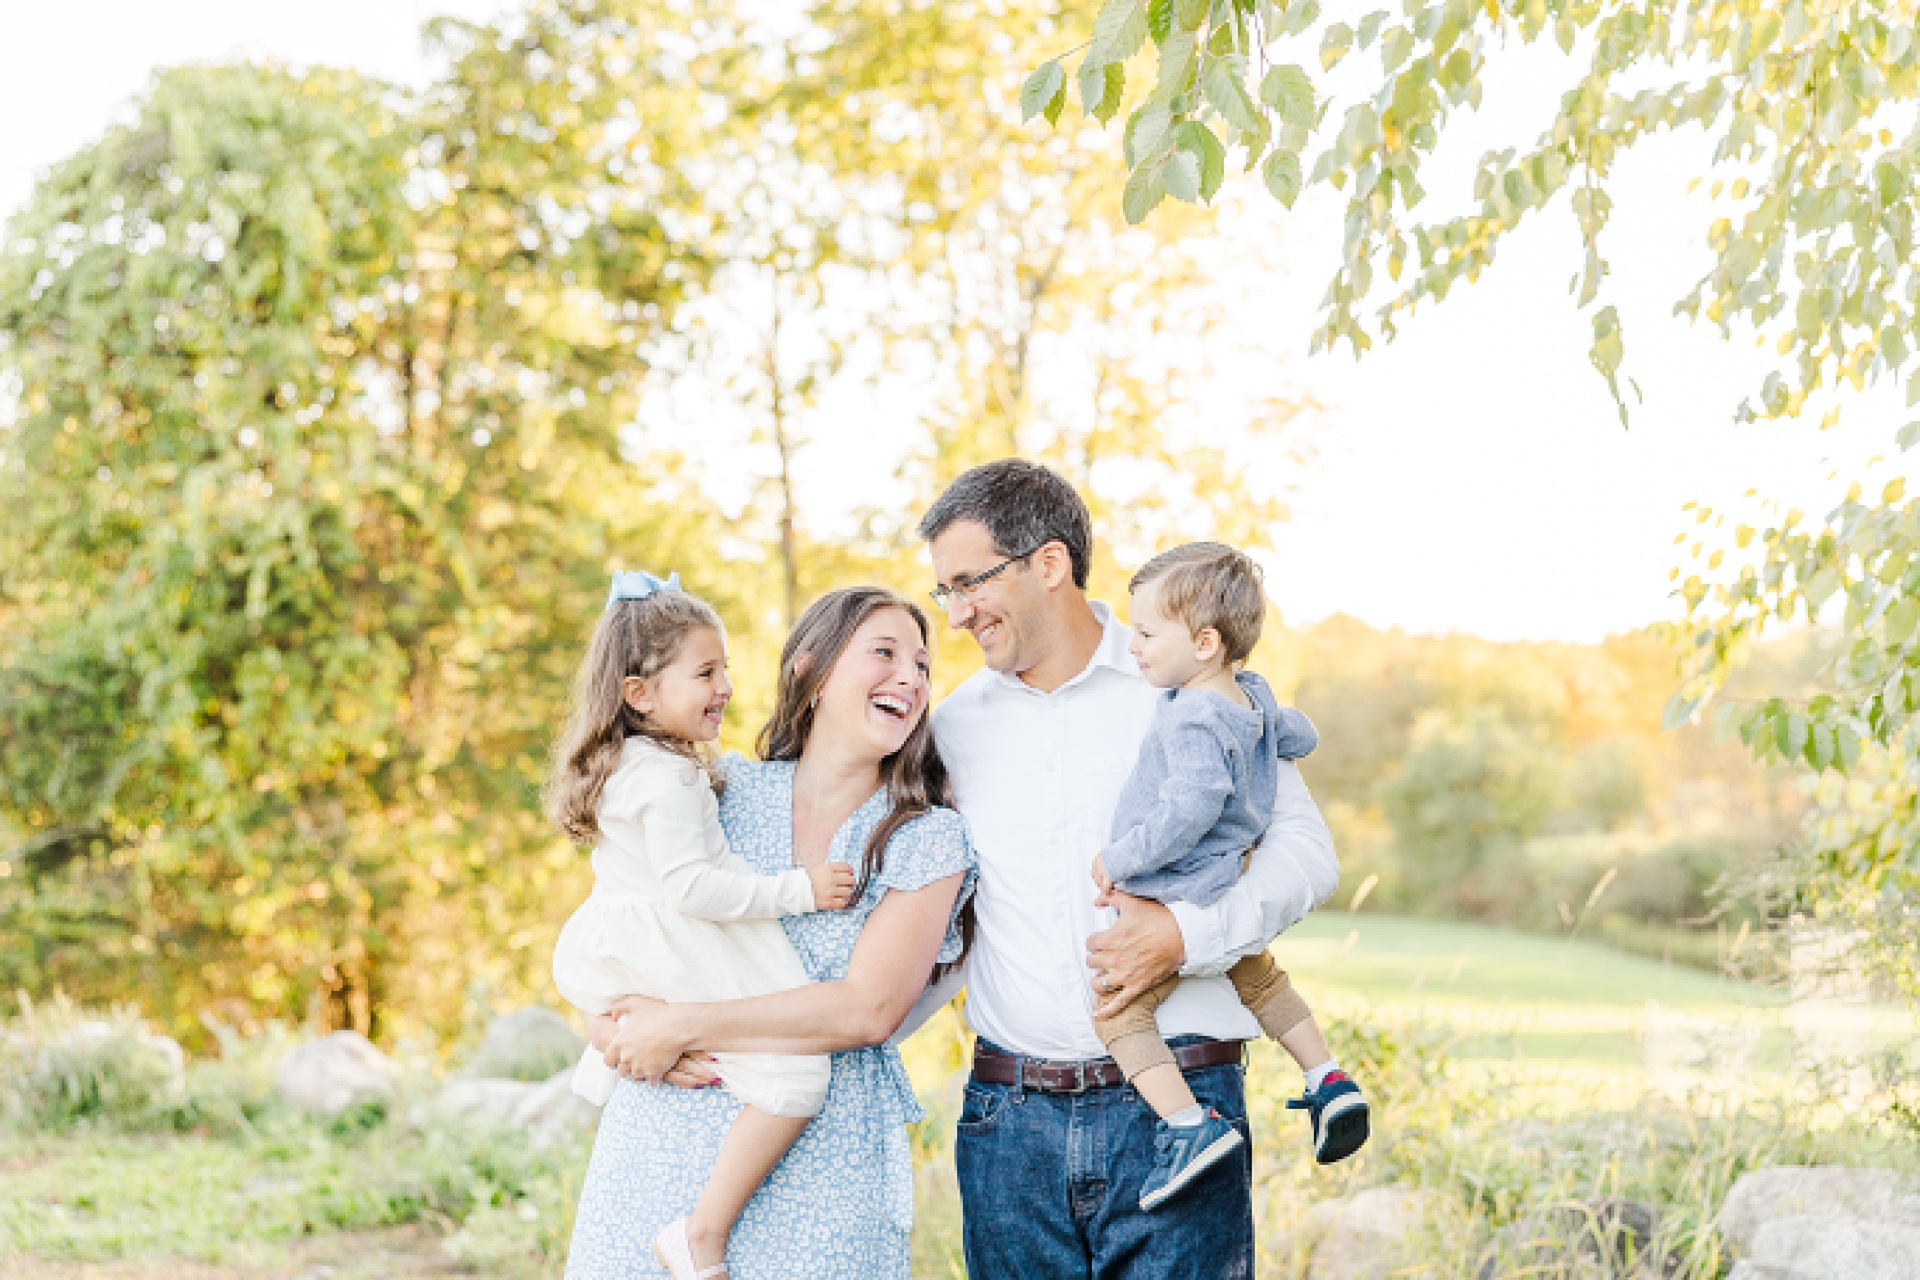 Family photo session with Sara Sniderman Photography at Oak Grove Park in Millis Massachusetts